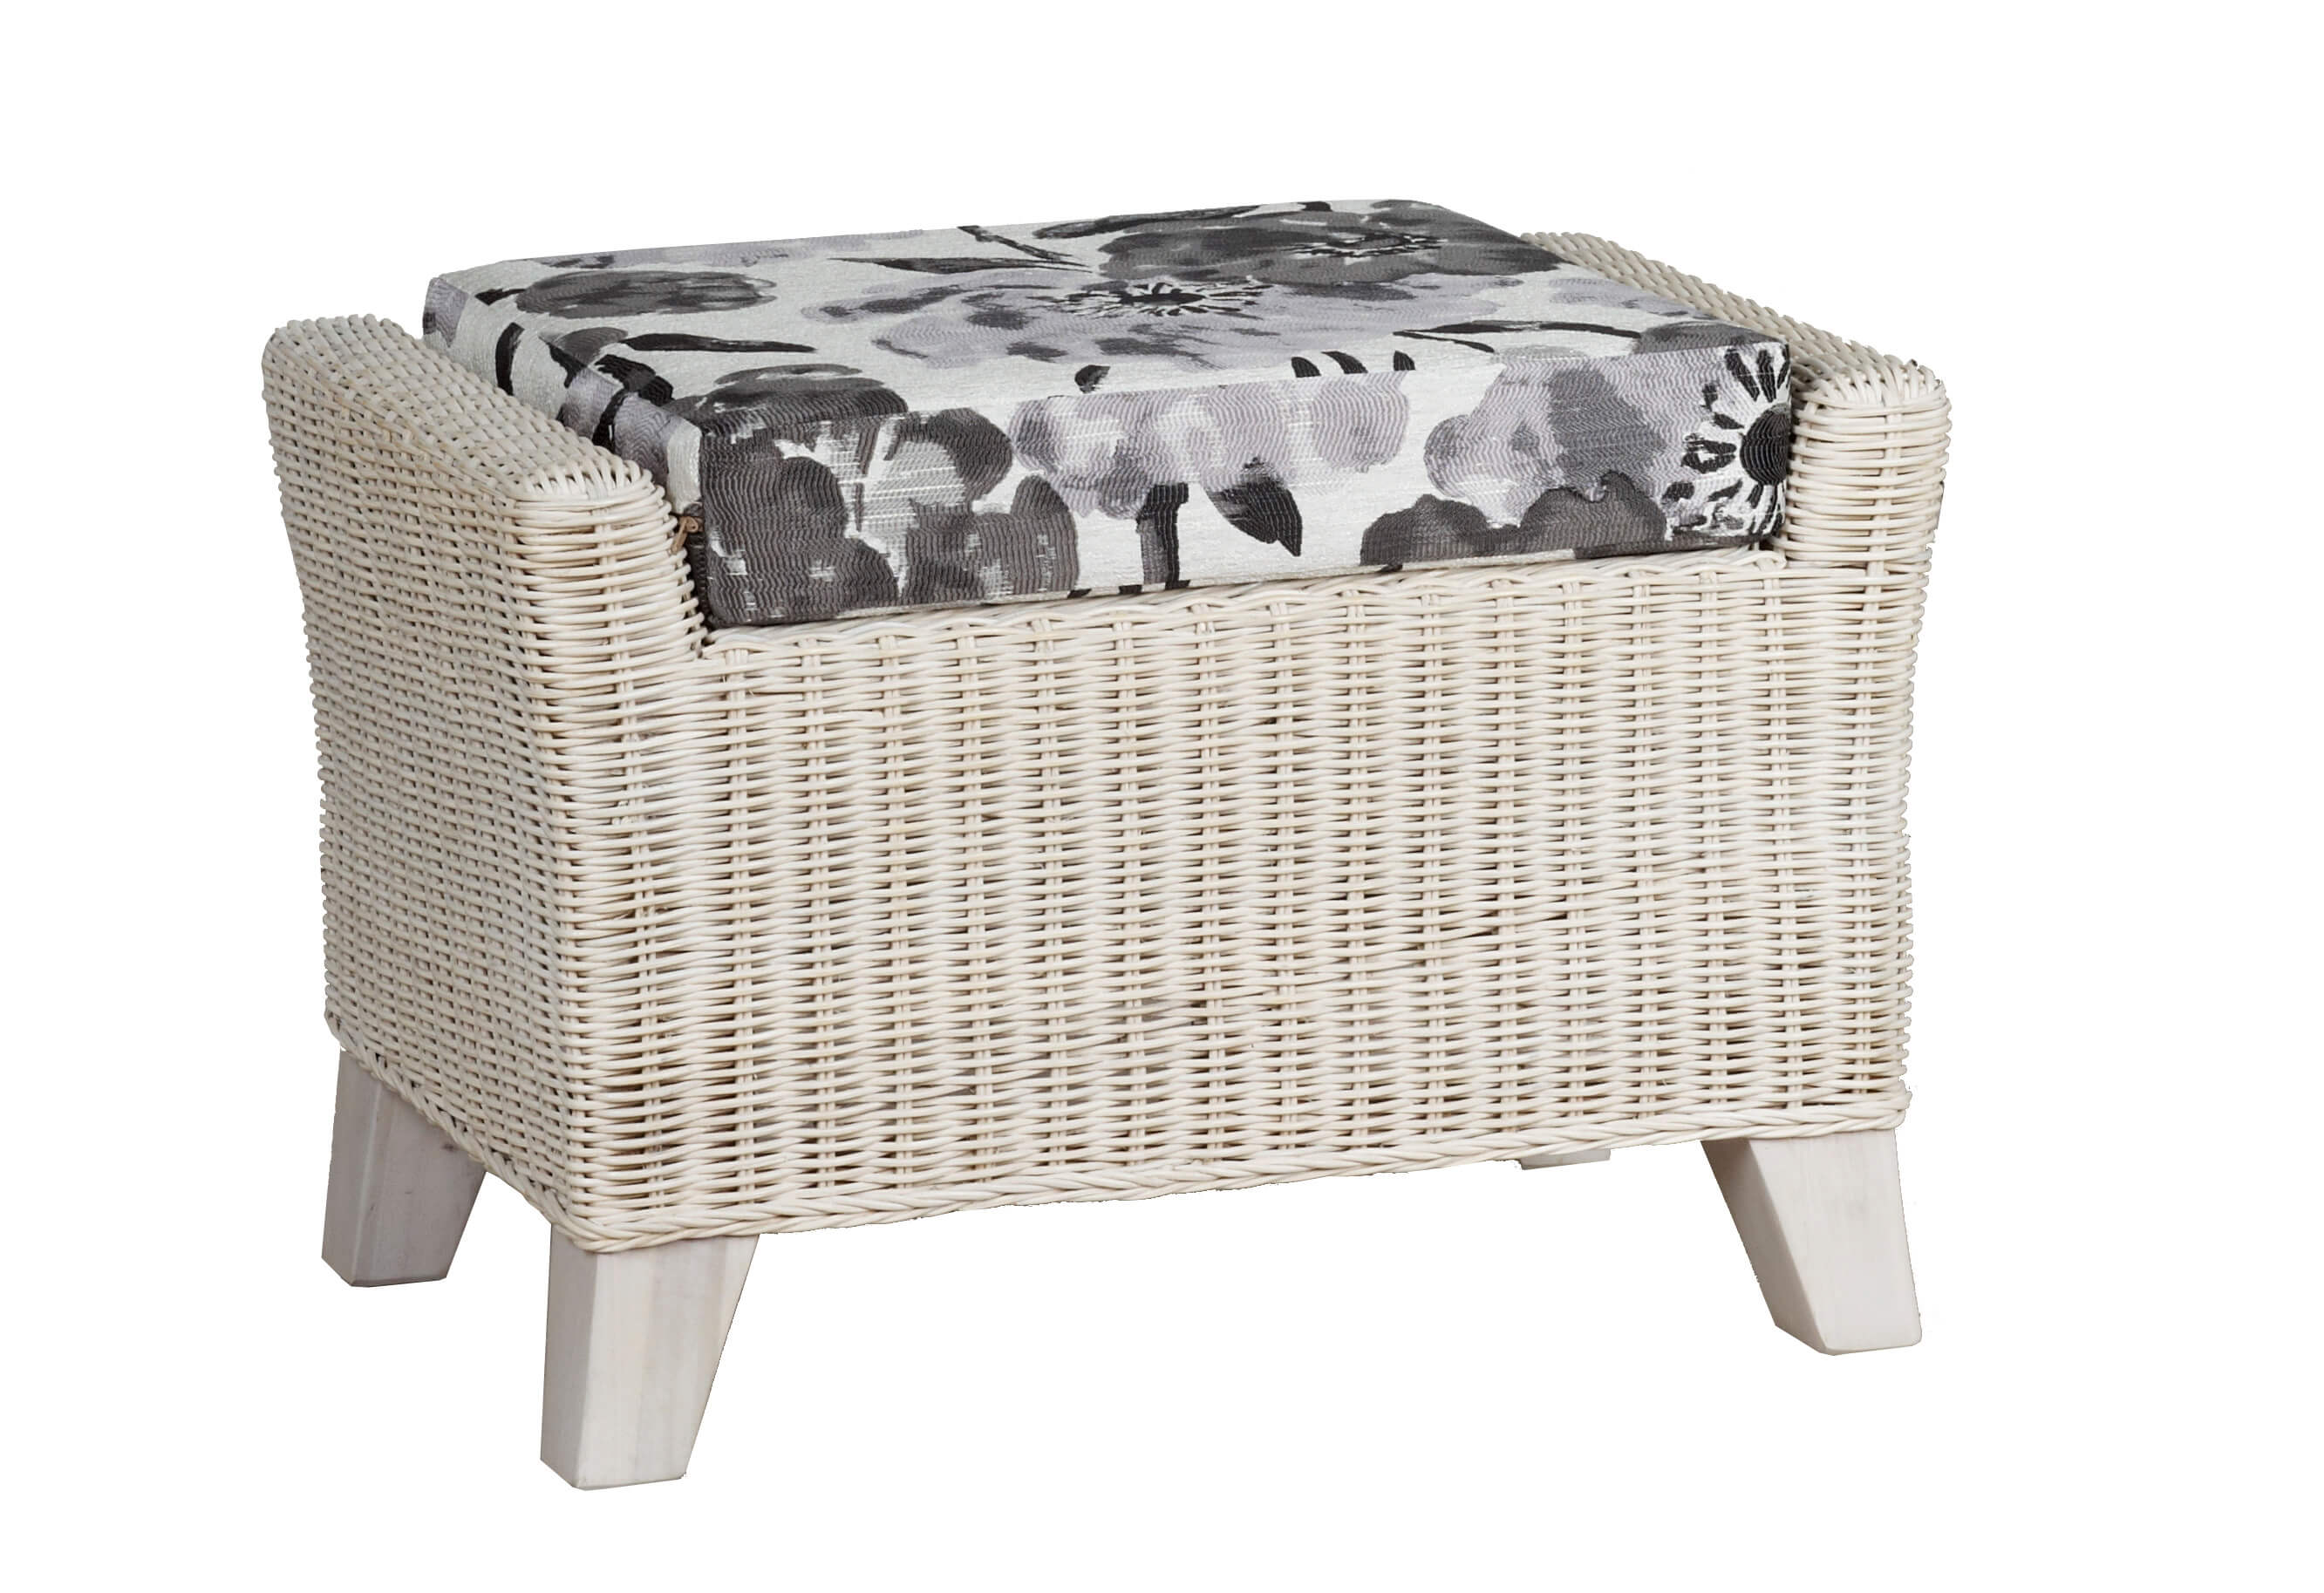 Showing image for Arona footstool